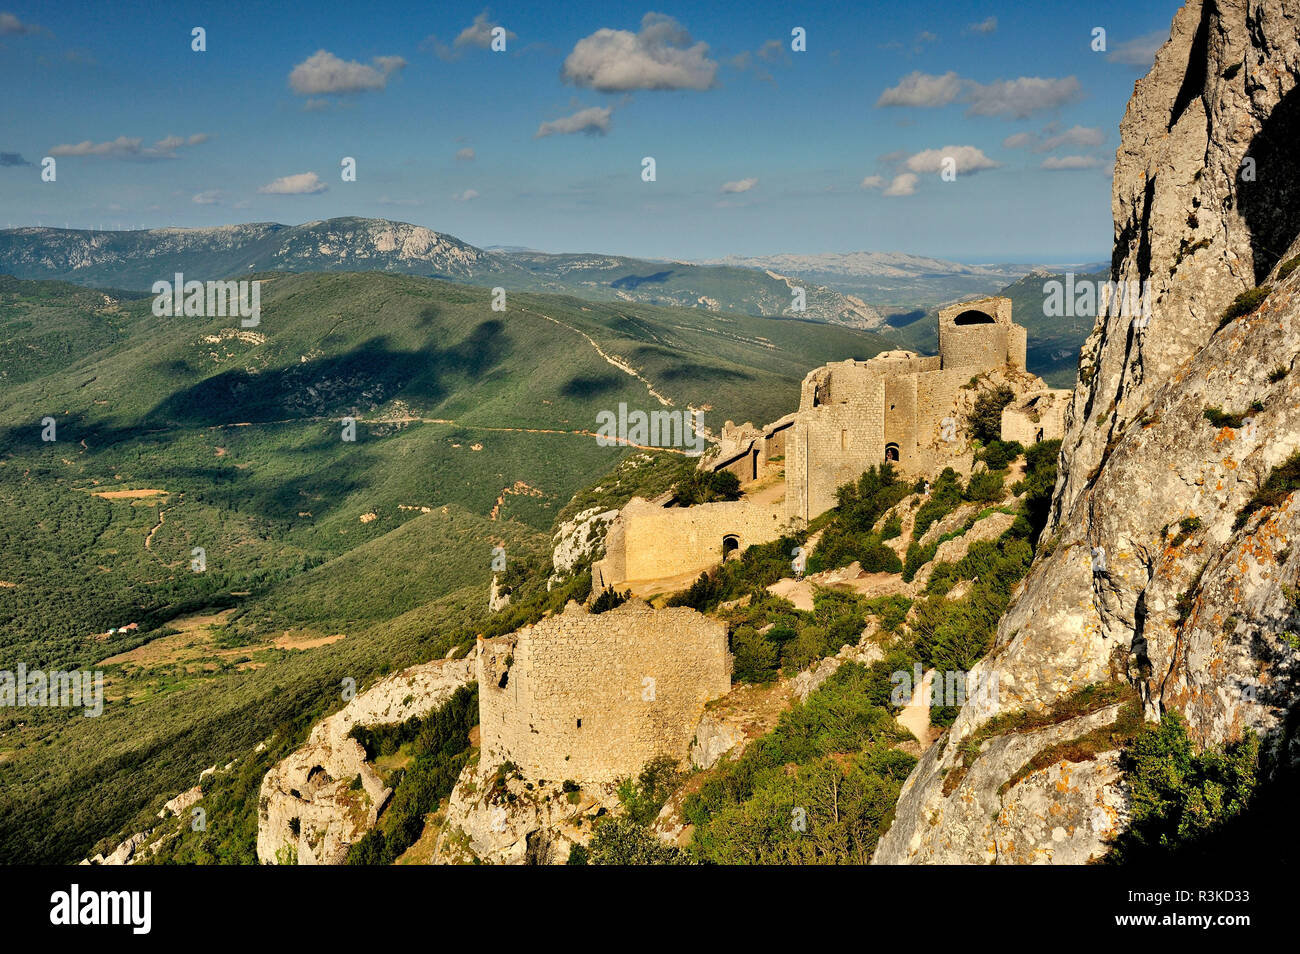 Cathar castle "Chateau de Peyrepertuse in the town of Duilhac-sous-Peyrepertuse (south of France). The building is classified as a National Historic L Stock Photo